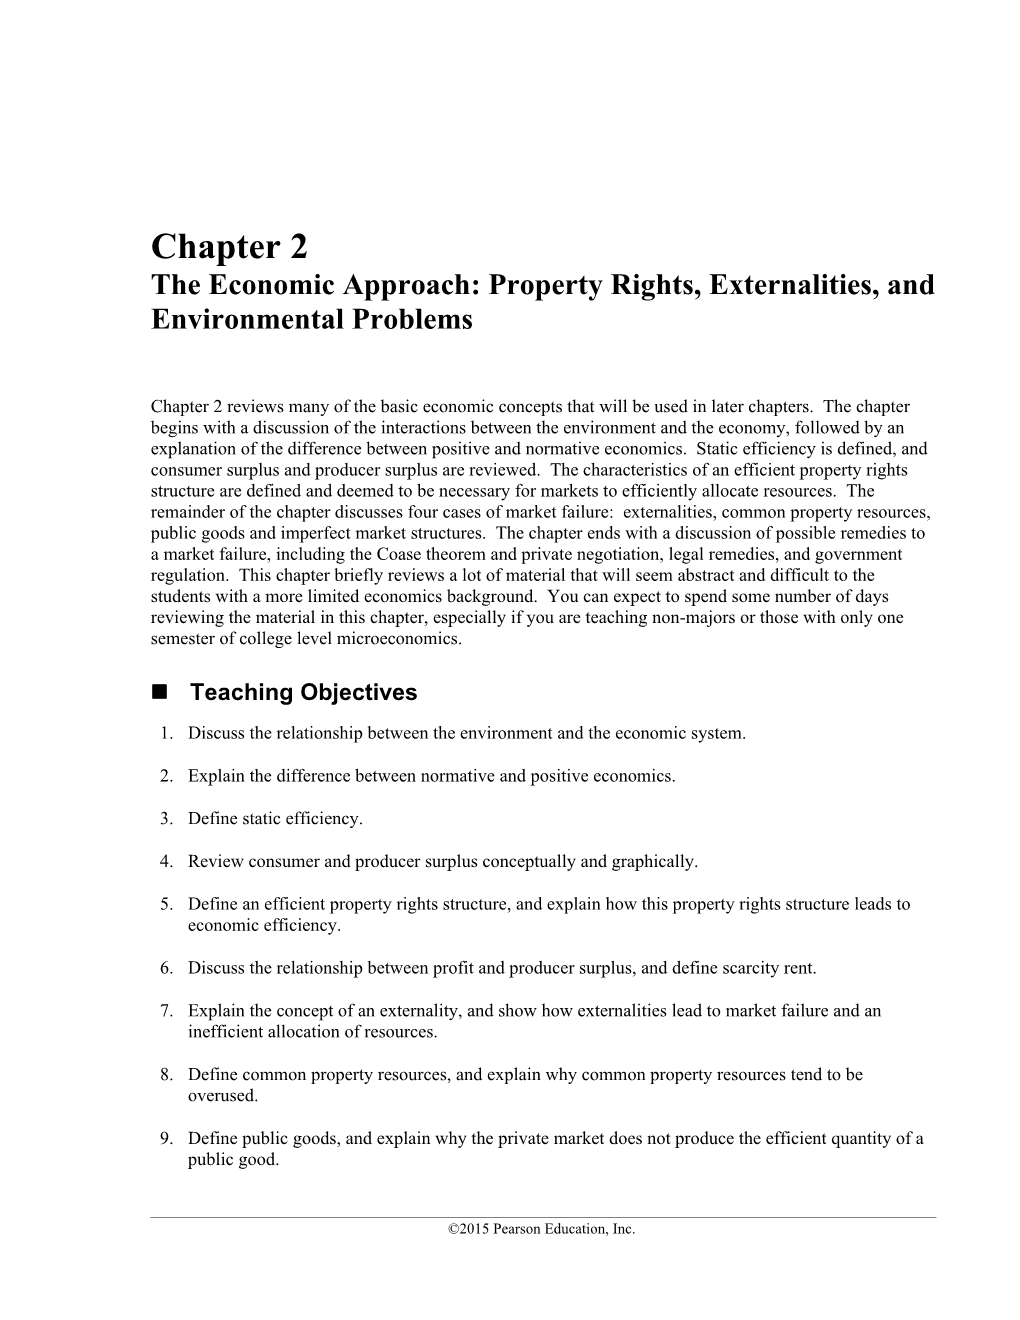 Chapter 2 the Economic Approach: Property Rights, Externalities, and Environmental Problems 1